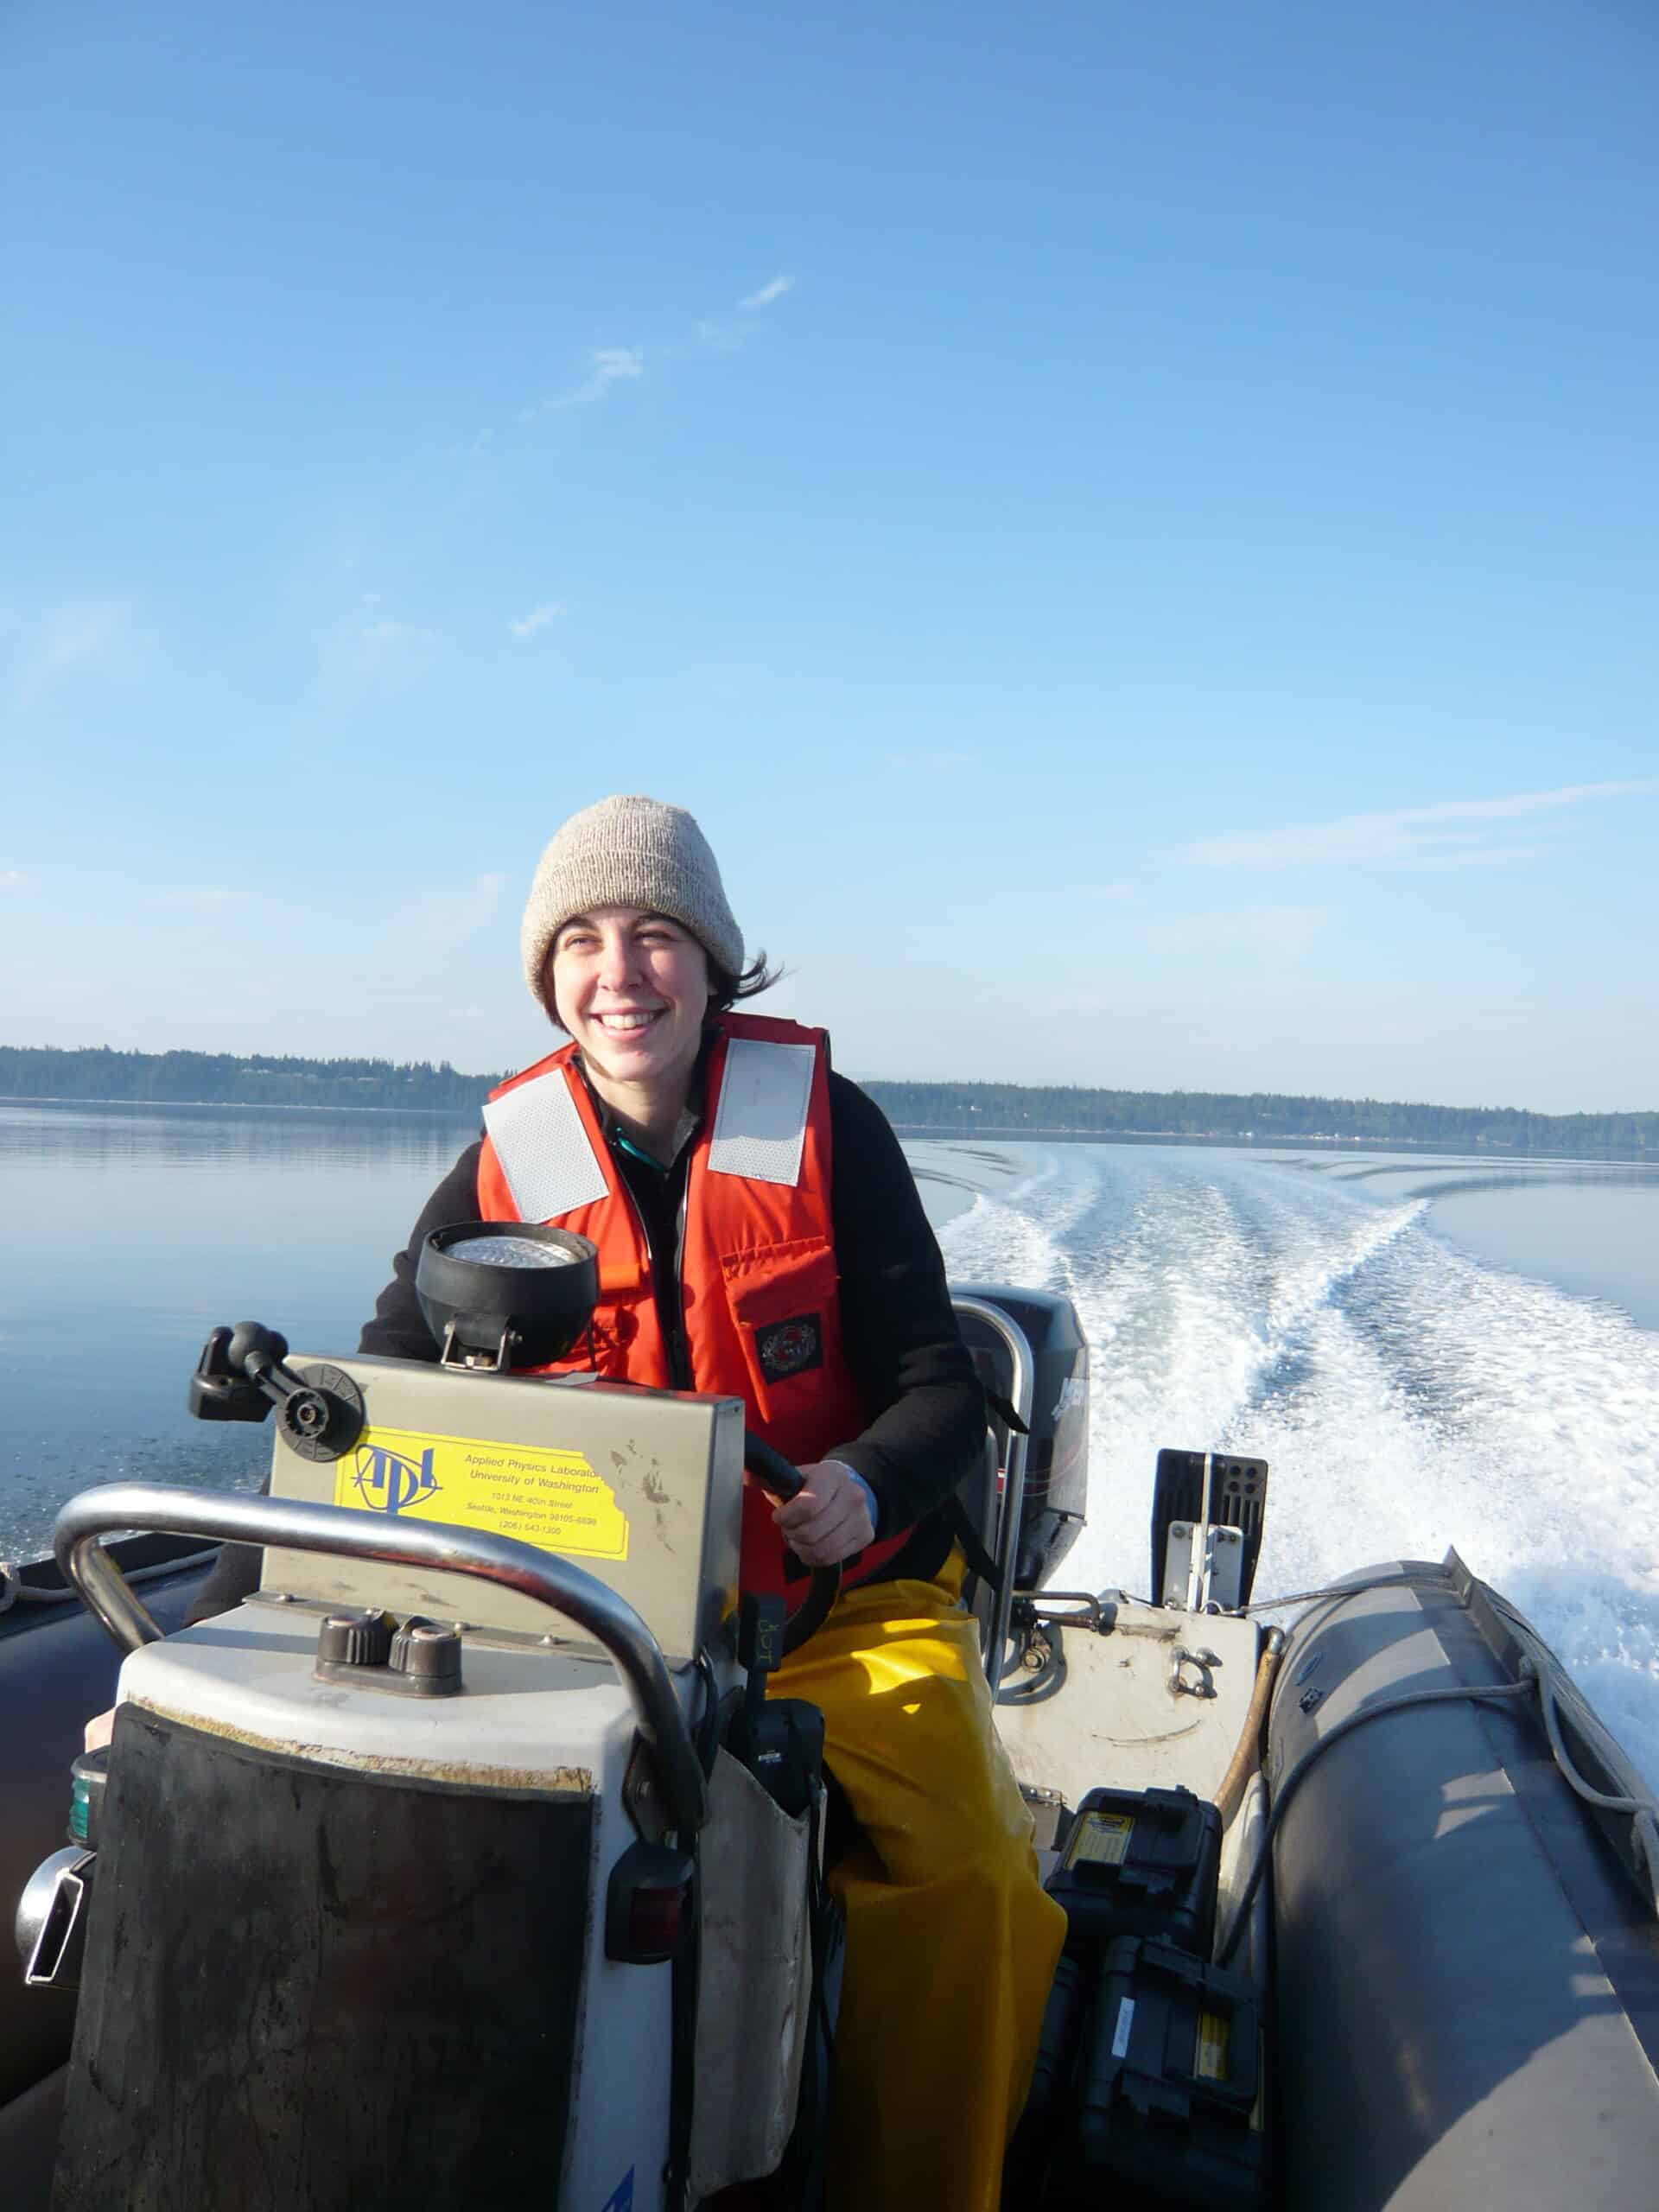 A researcher is piloting an inflatable powered boat, smiling and facing into the sun, with the boat's wake and shoreline in the background